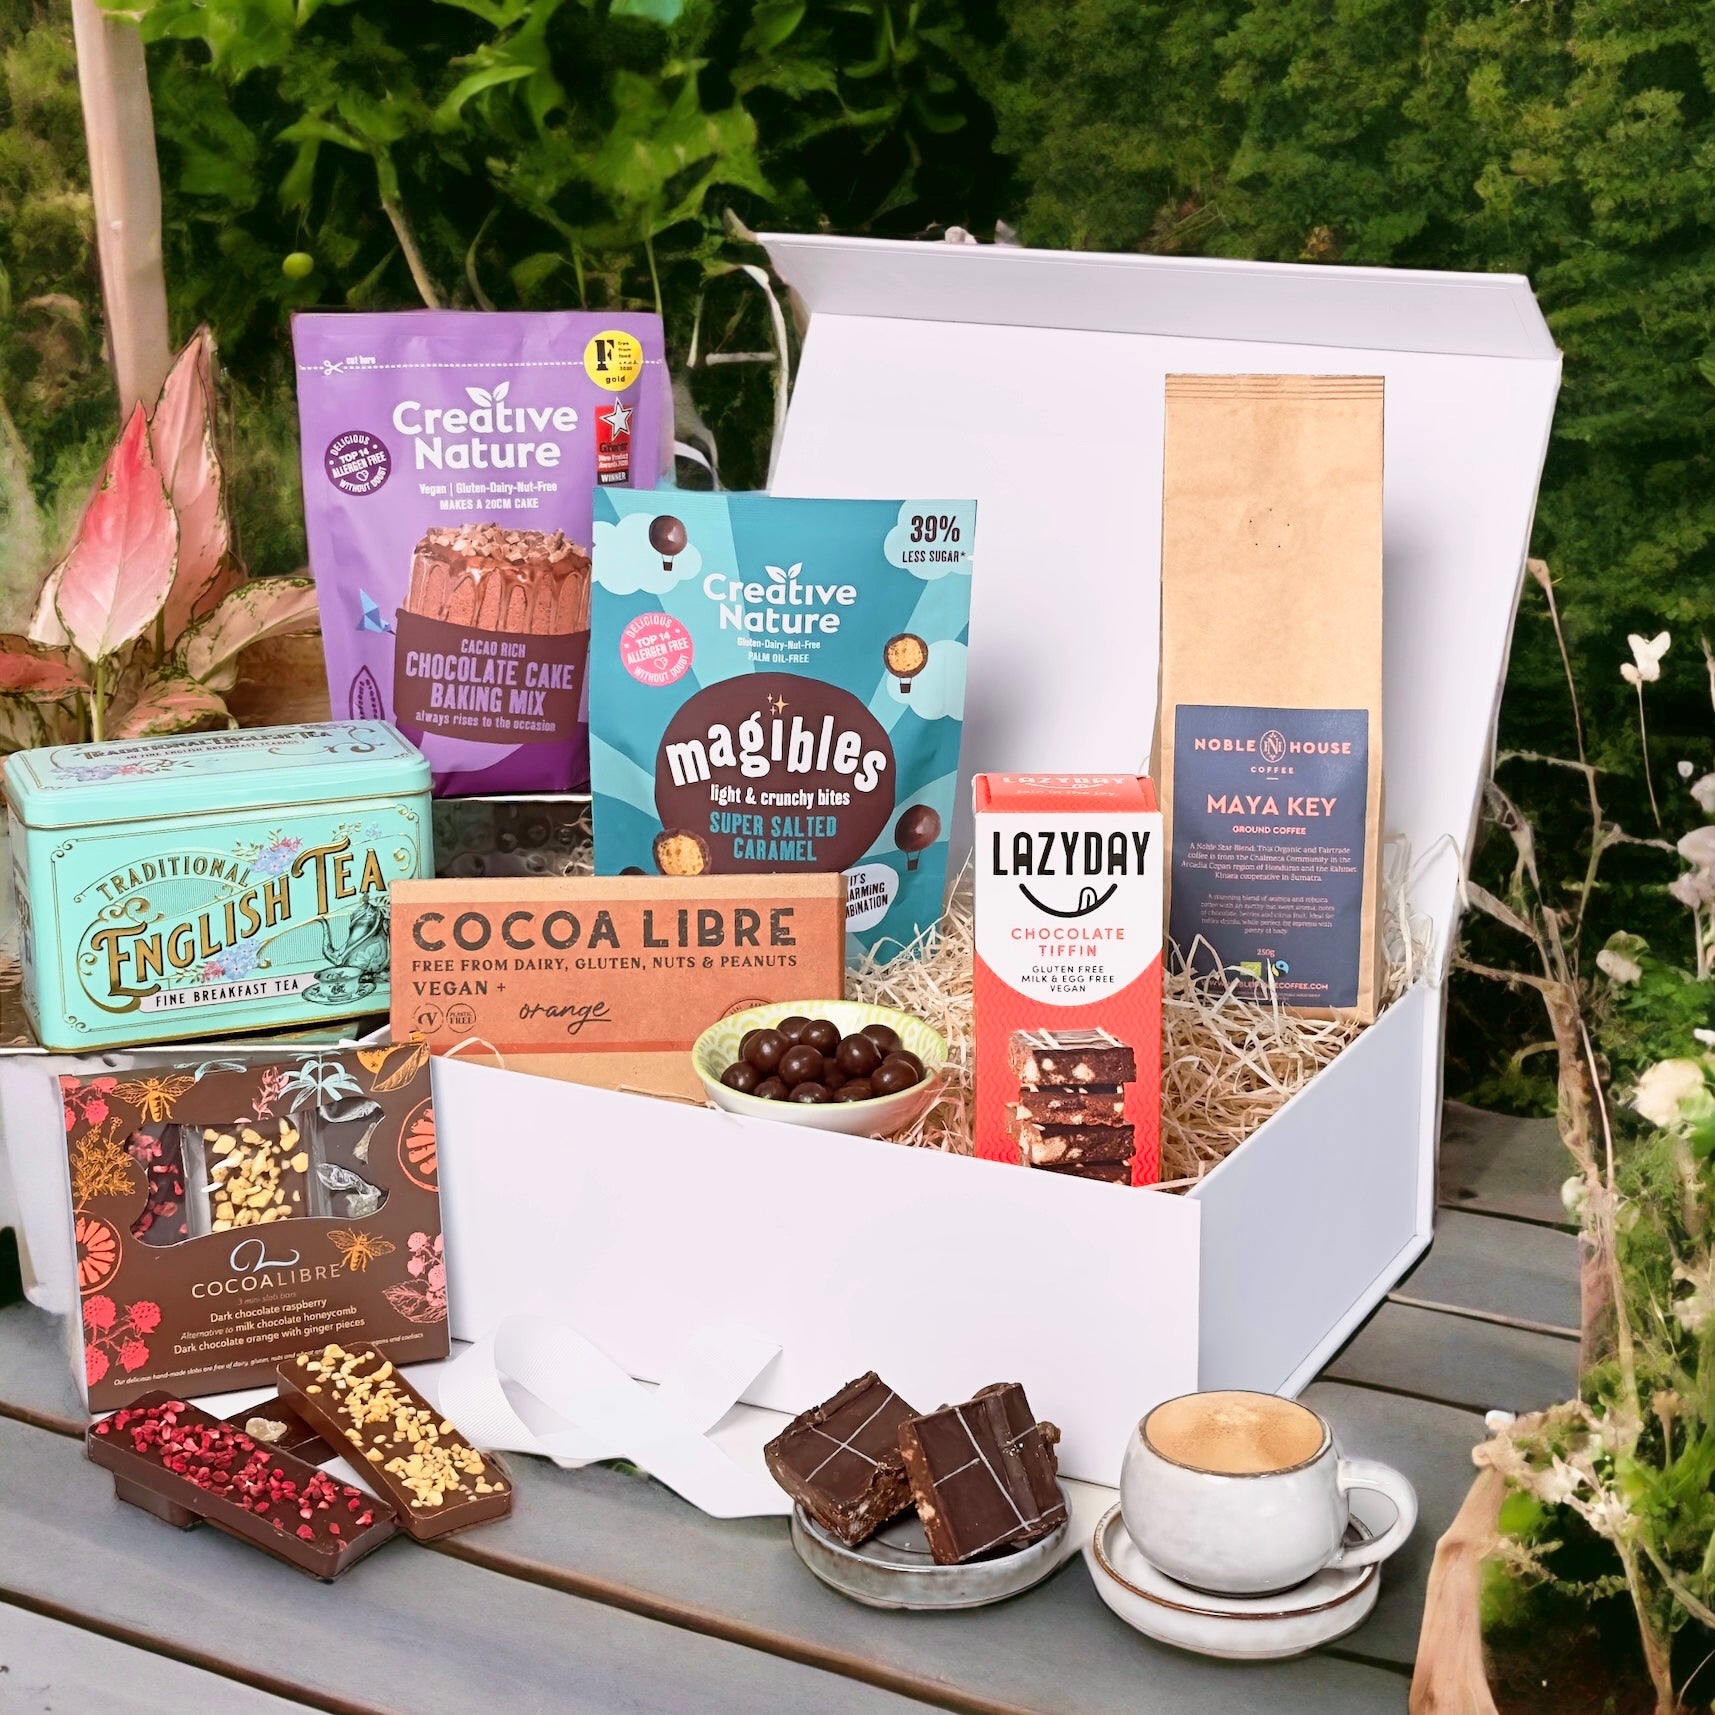 The Free-From Celebration Hamper